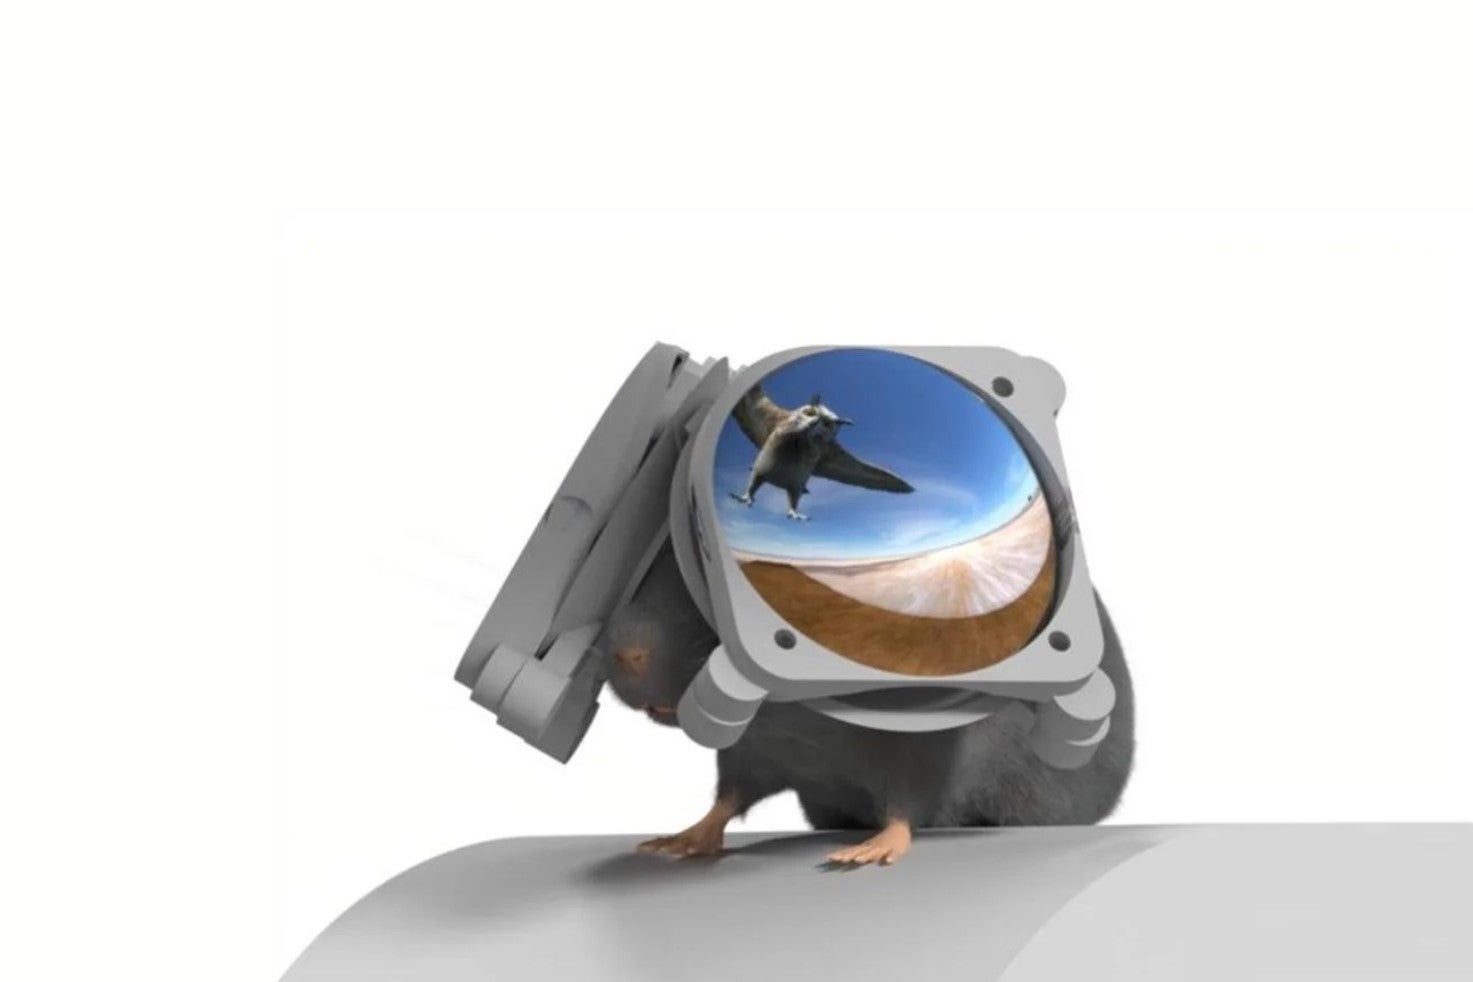 An illustration of Northwestern’s virtual reality headset on a mouse